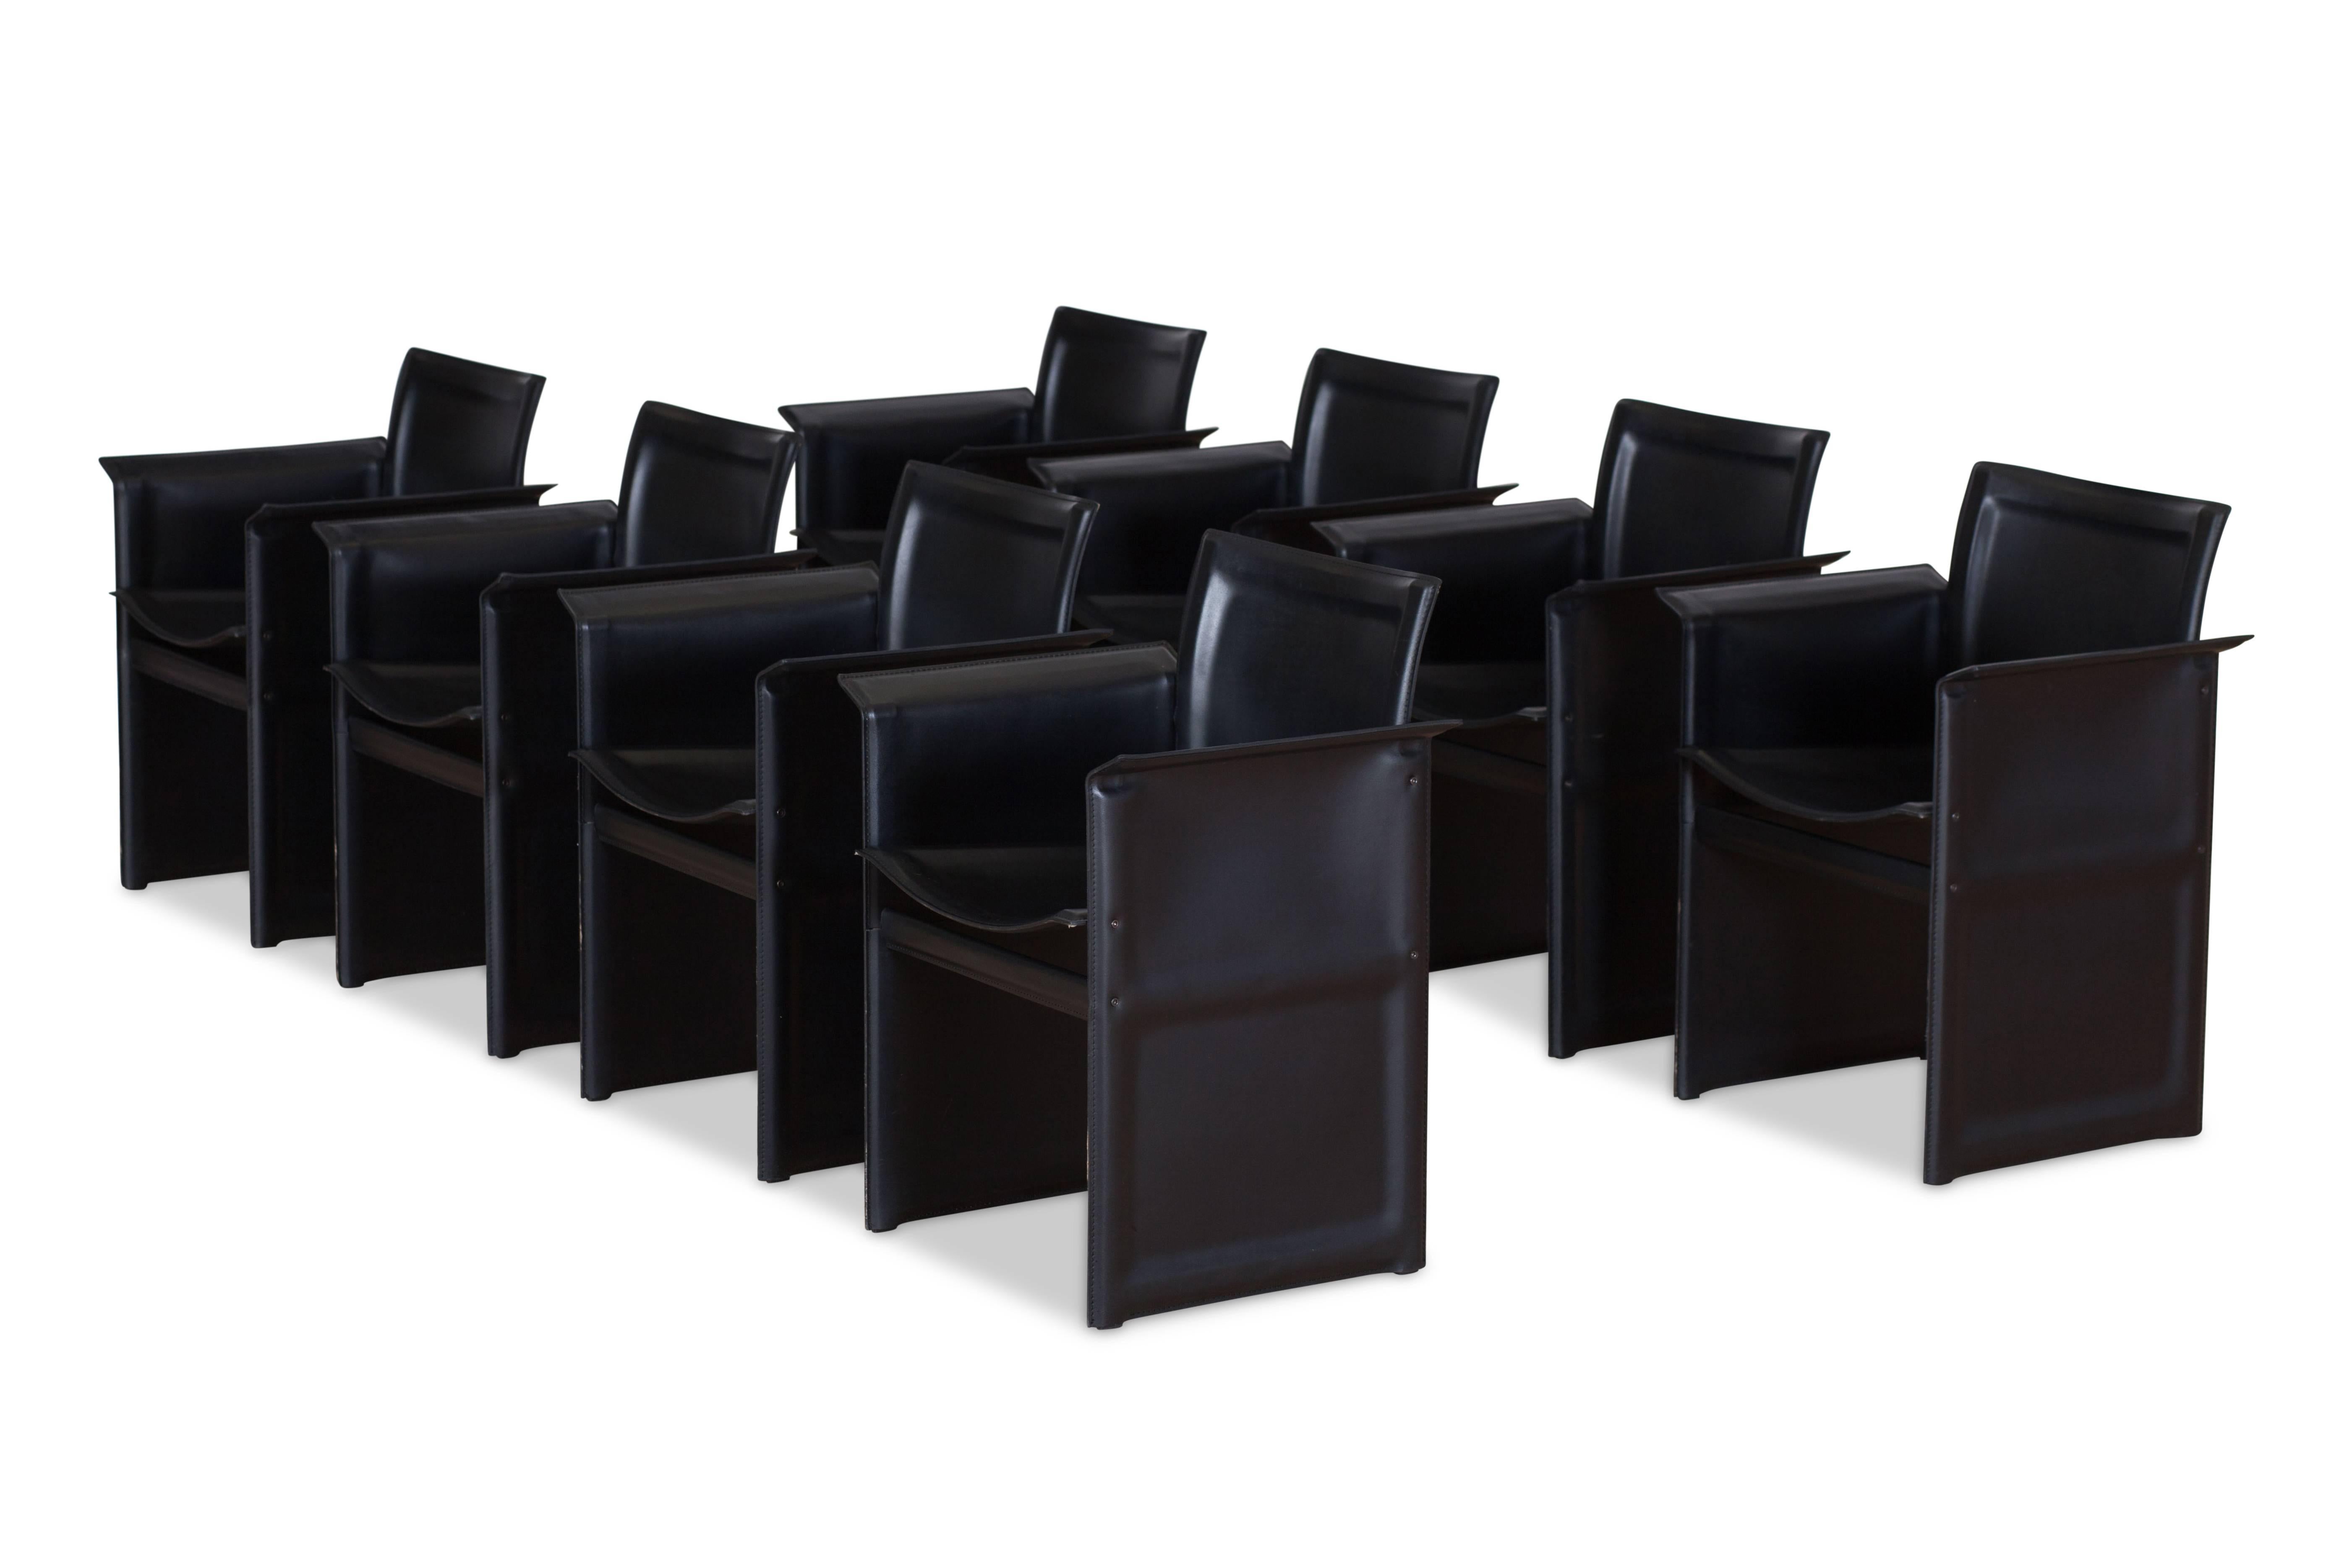 Tito Agnoli black leather dinging chairs, Italy, 1970s

Set of eight black leather dining chairs, model: ‘Korium” by Tito Agnoli, Italy, 1970s.

High and comfortable seat. We sharp lines gives the armrest a almost ‘wing’ like